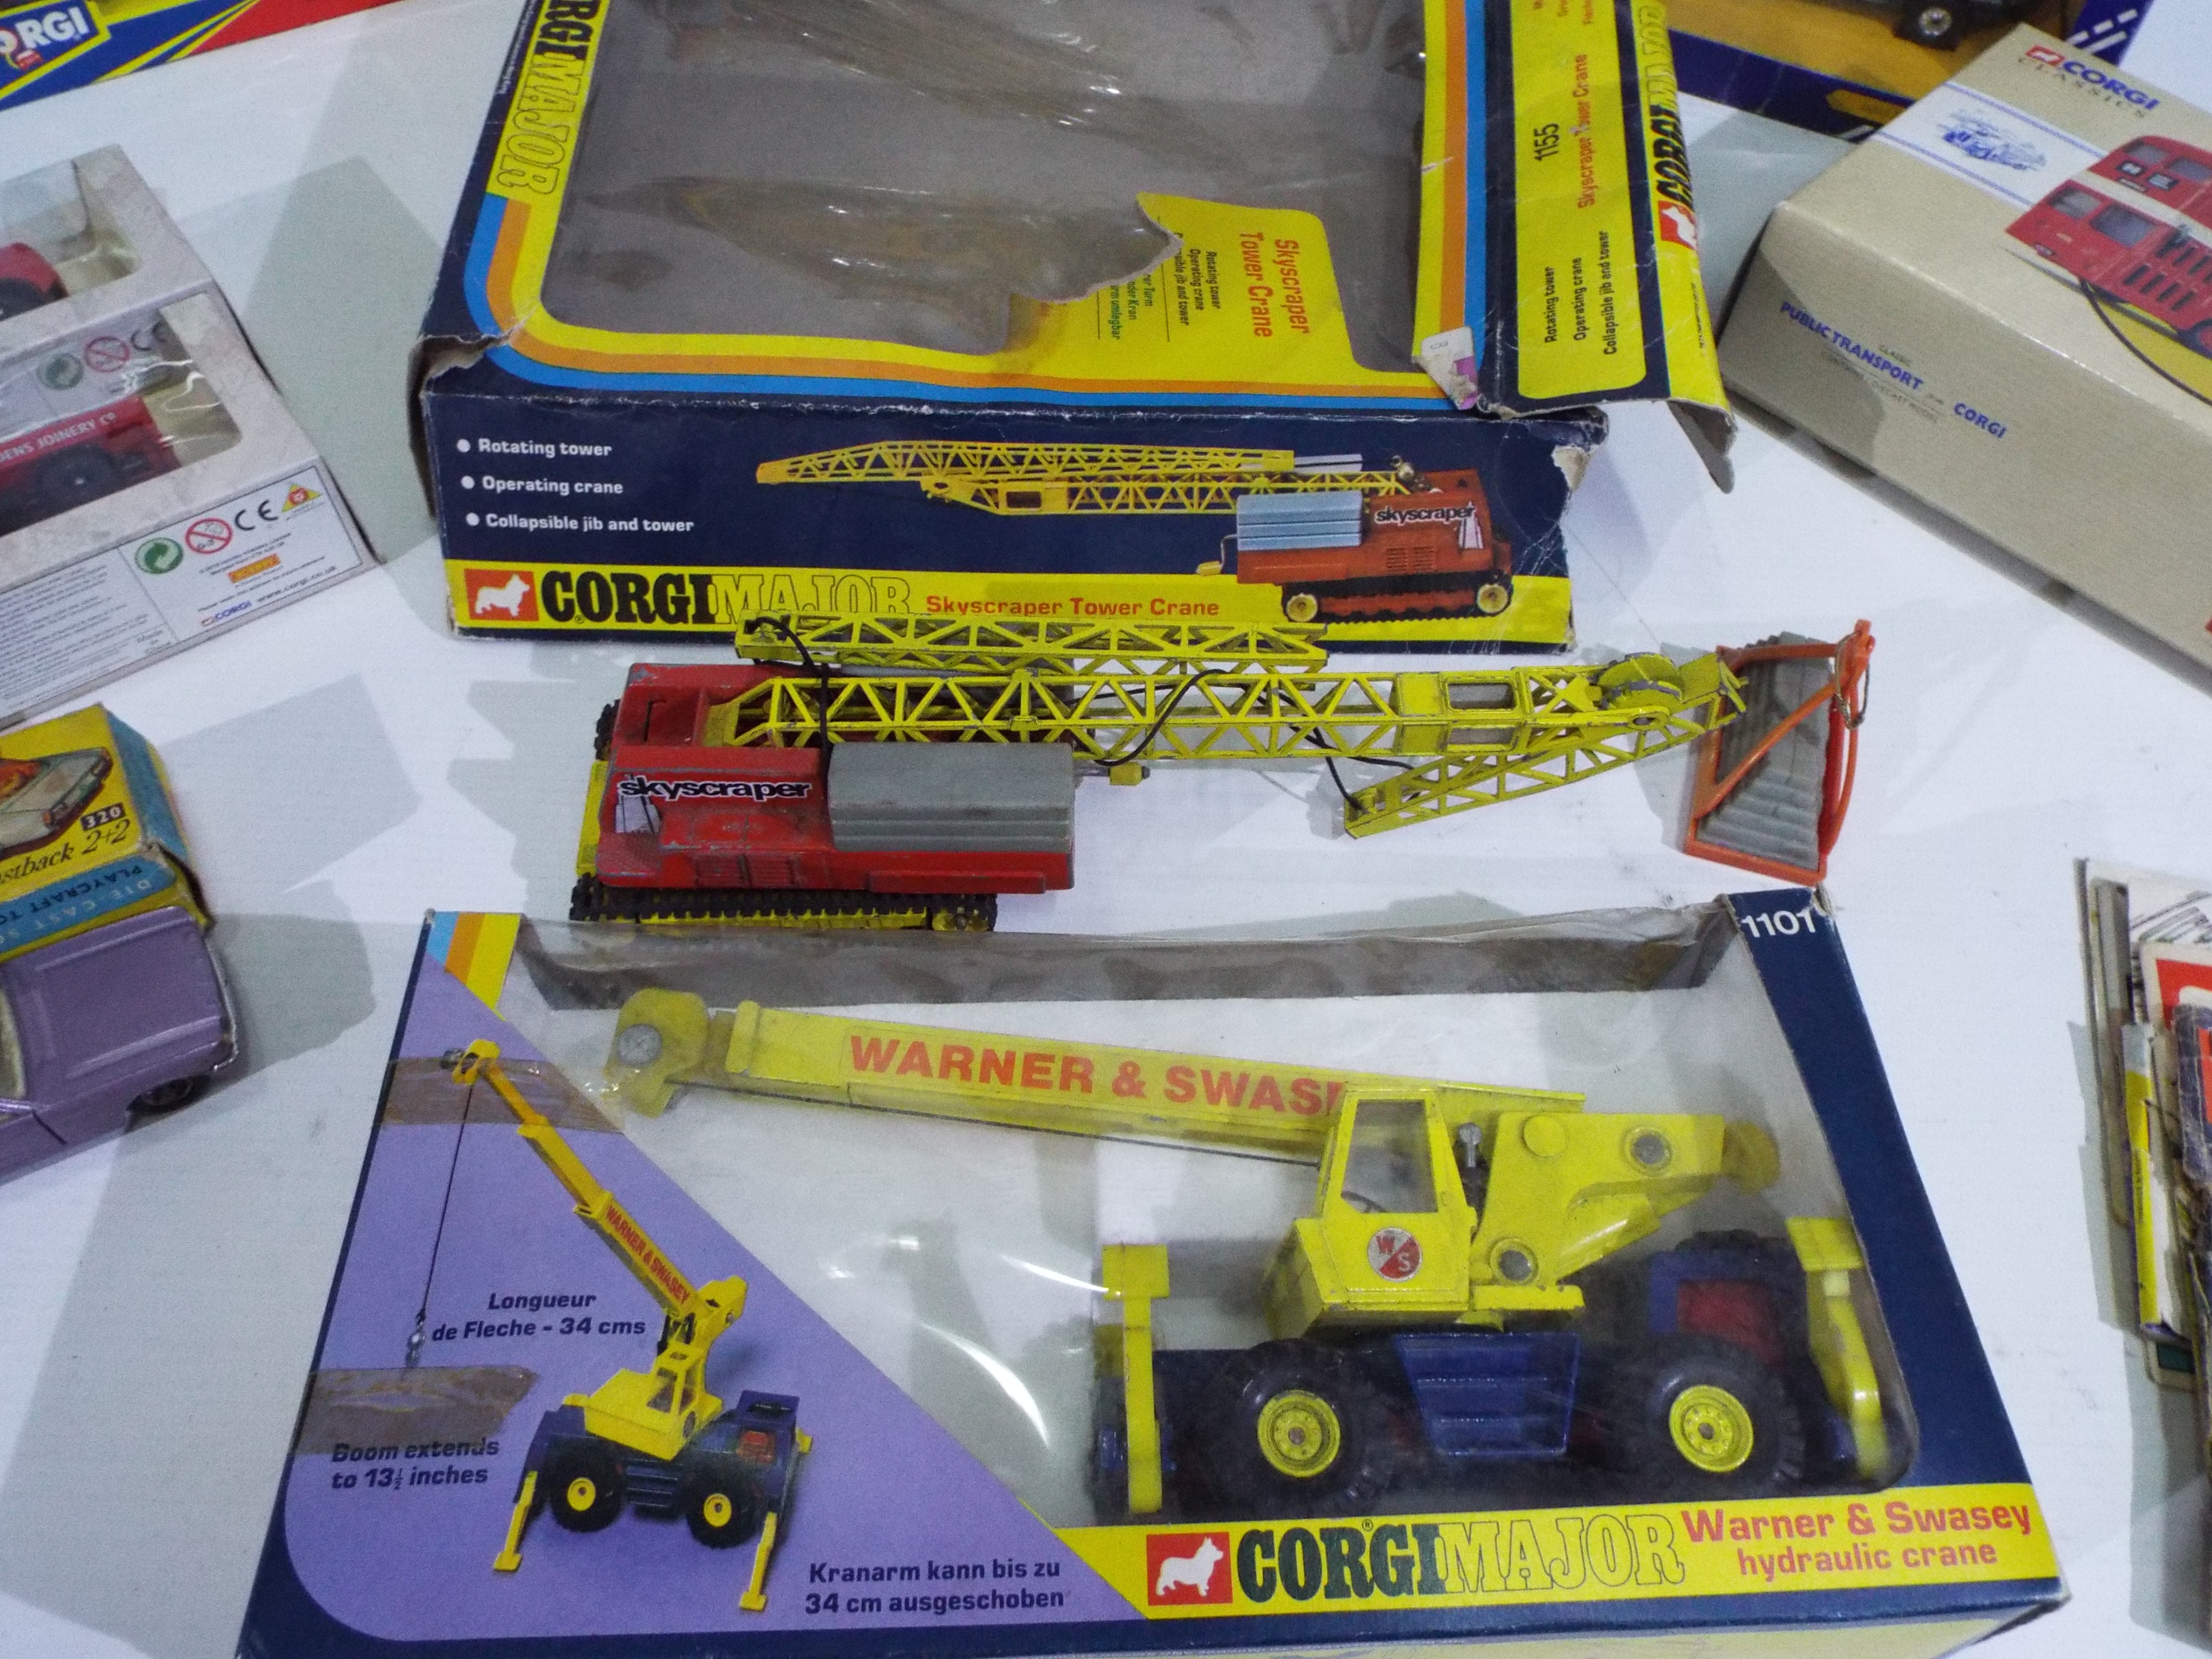 Corgi - 16 x boxed die-cast Corgi vehicles - Lot includes a 320 Ford Mustang, - Image 2 of 7